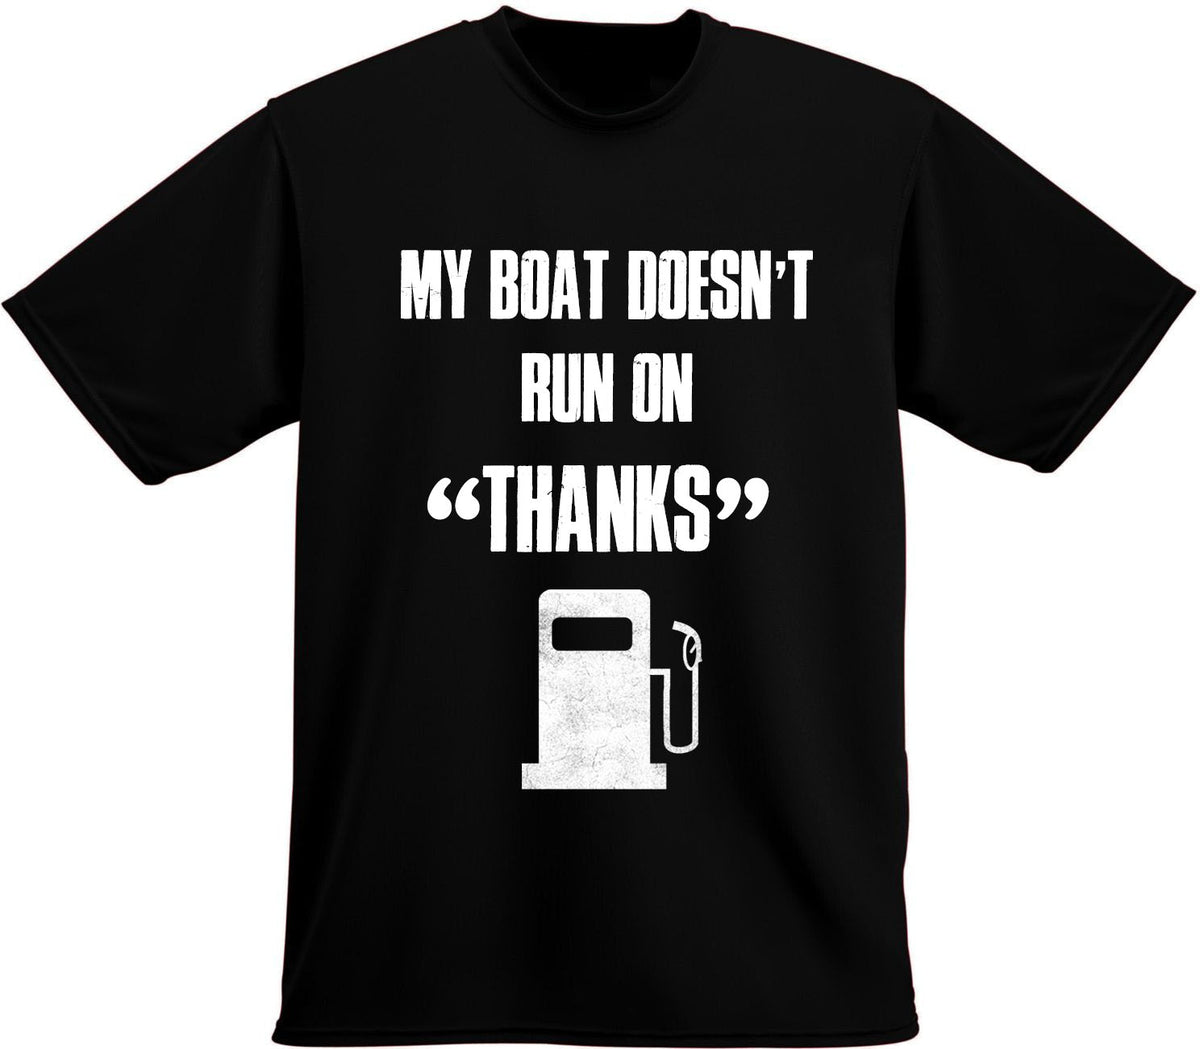 My boat doesn't run on thanks, Boating